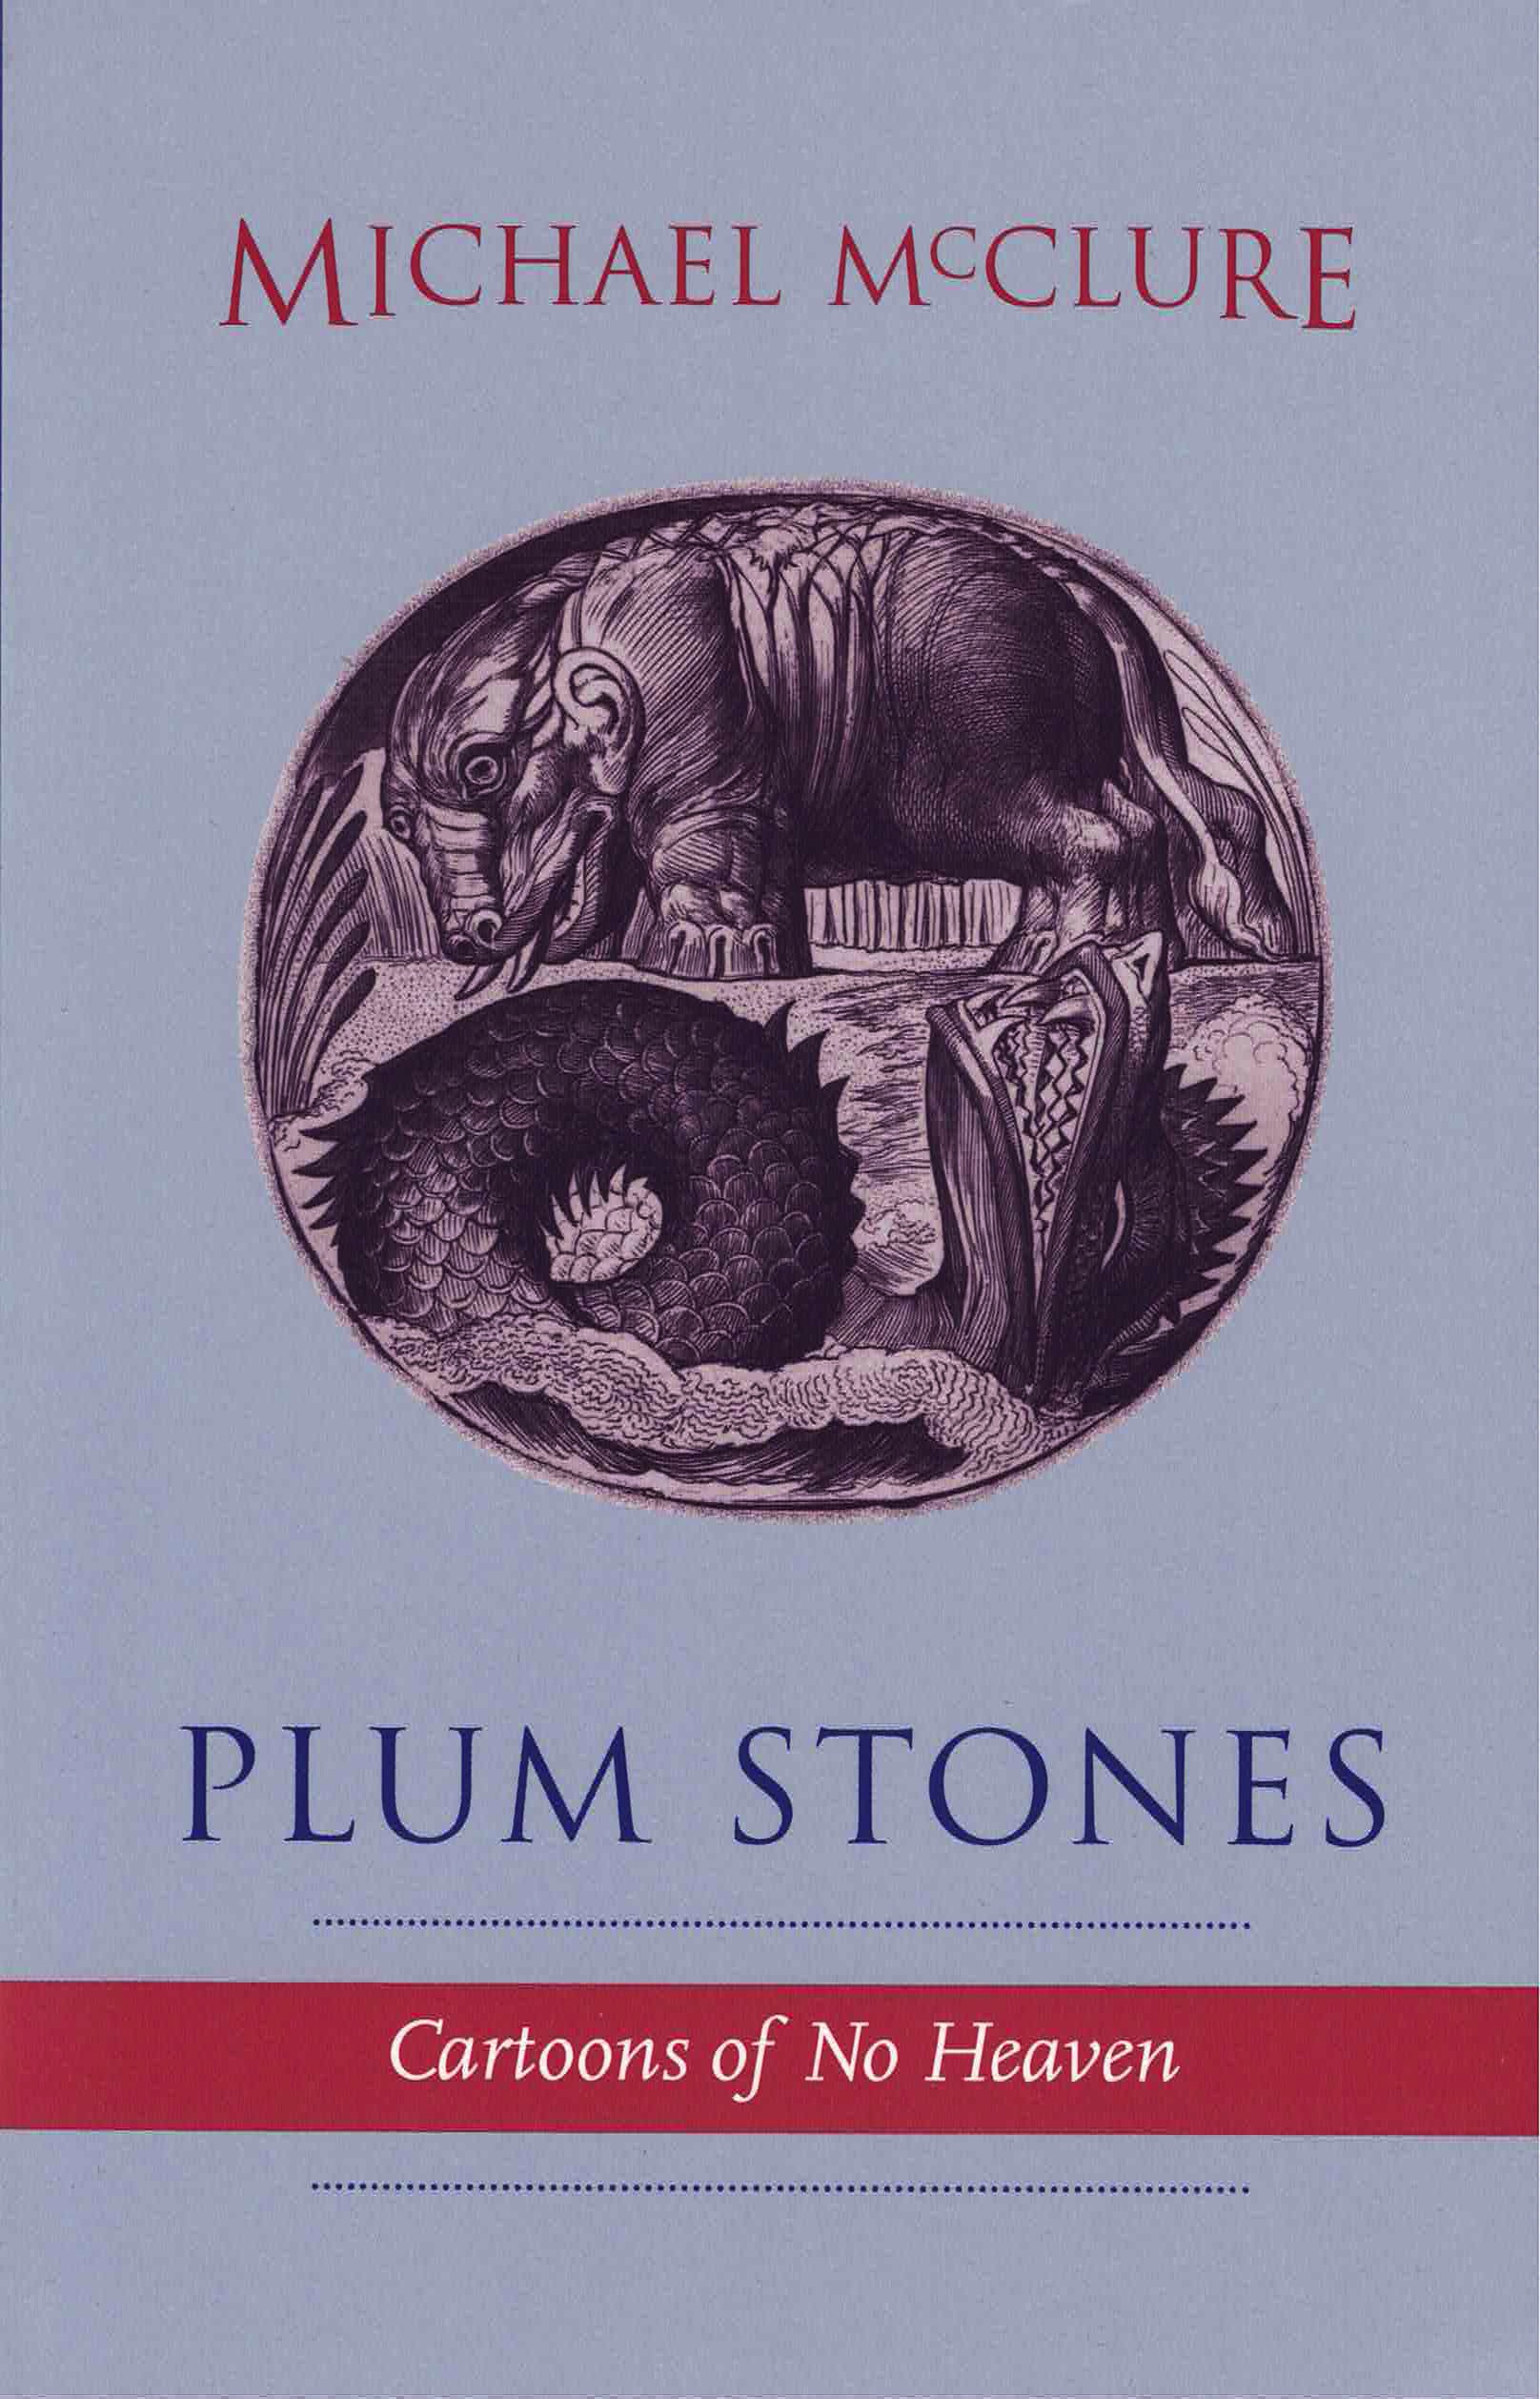 cover of Plum Stones by michael mcclure, light blue background with circular illustration at the center of boar-like creature standing on land and a dragon in water